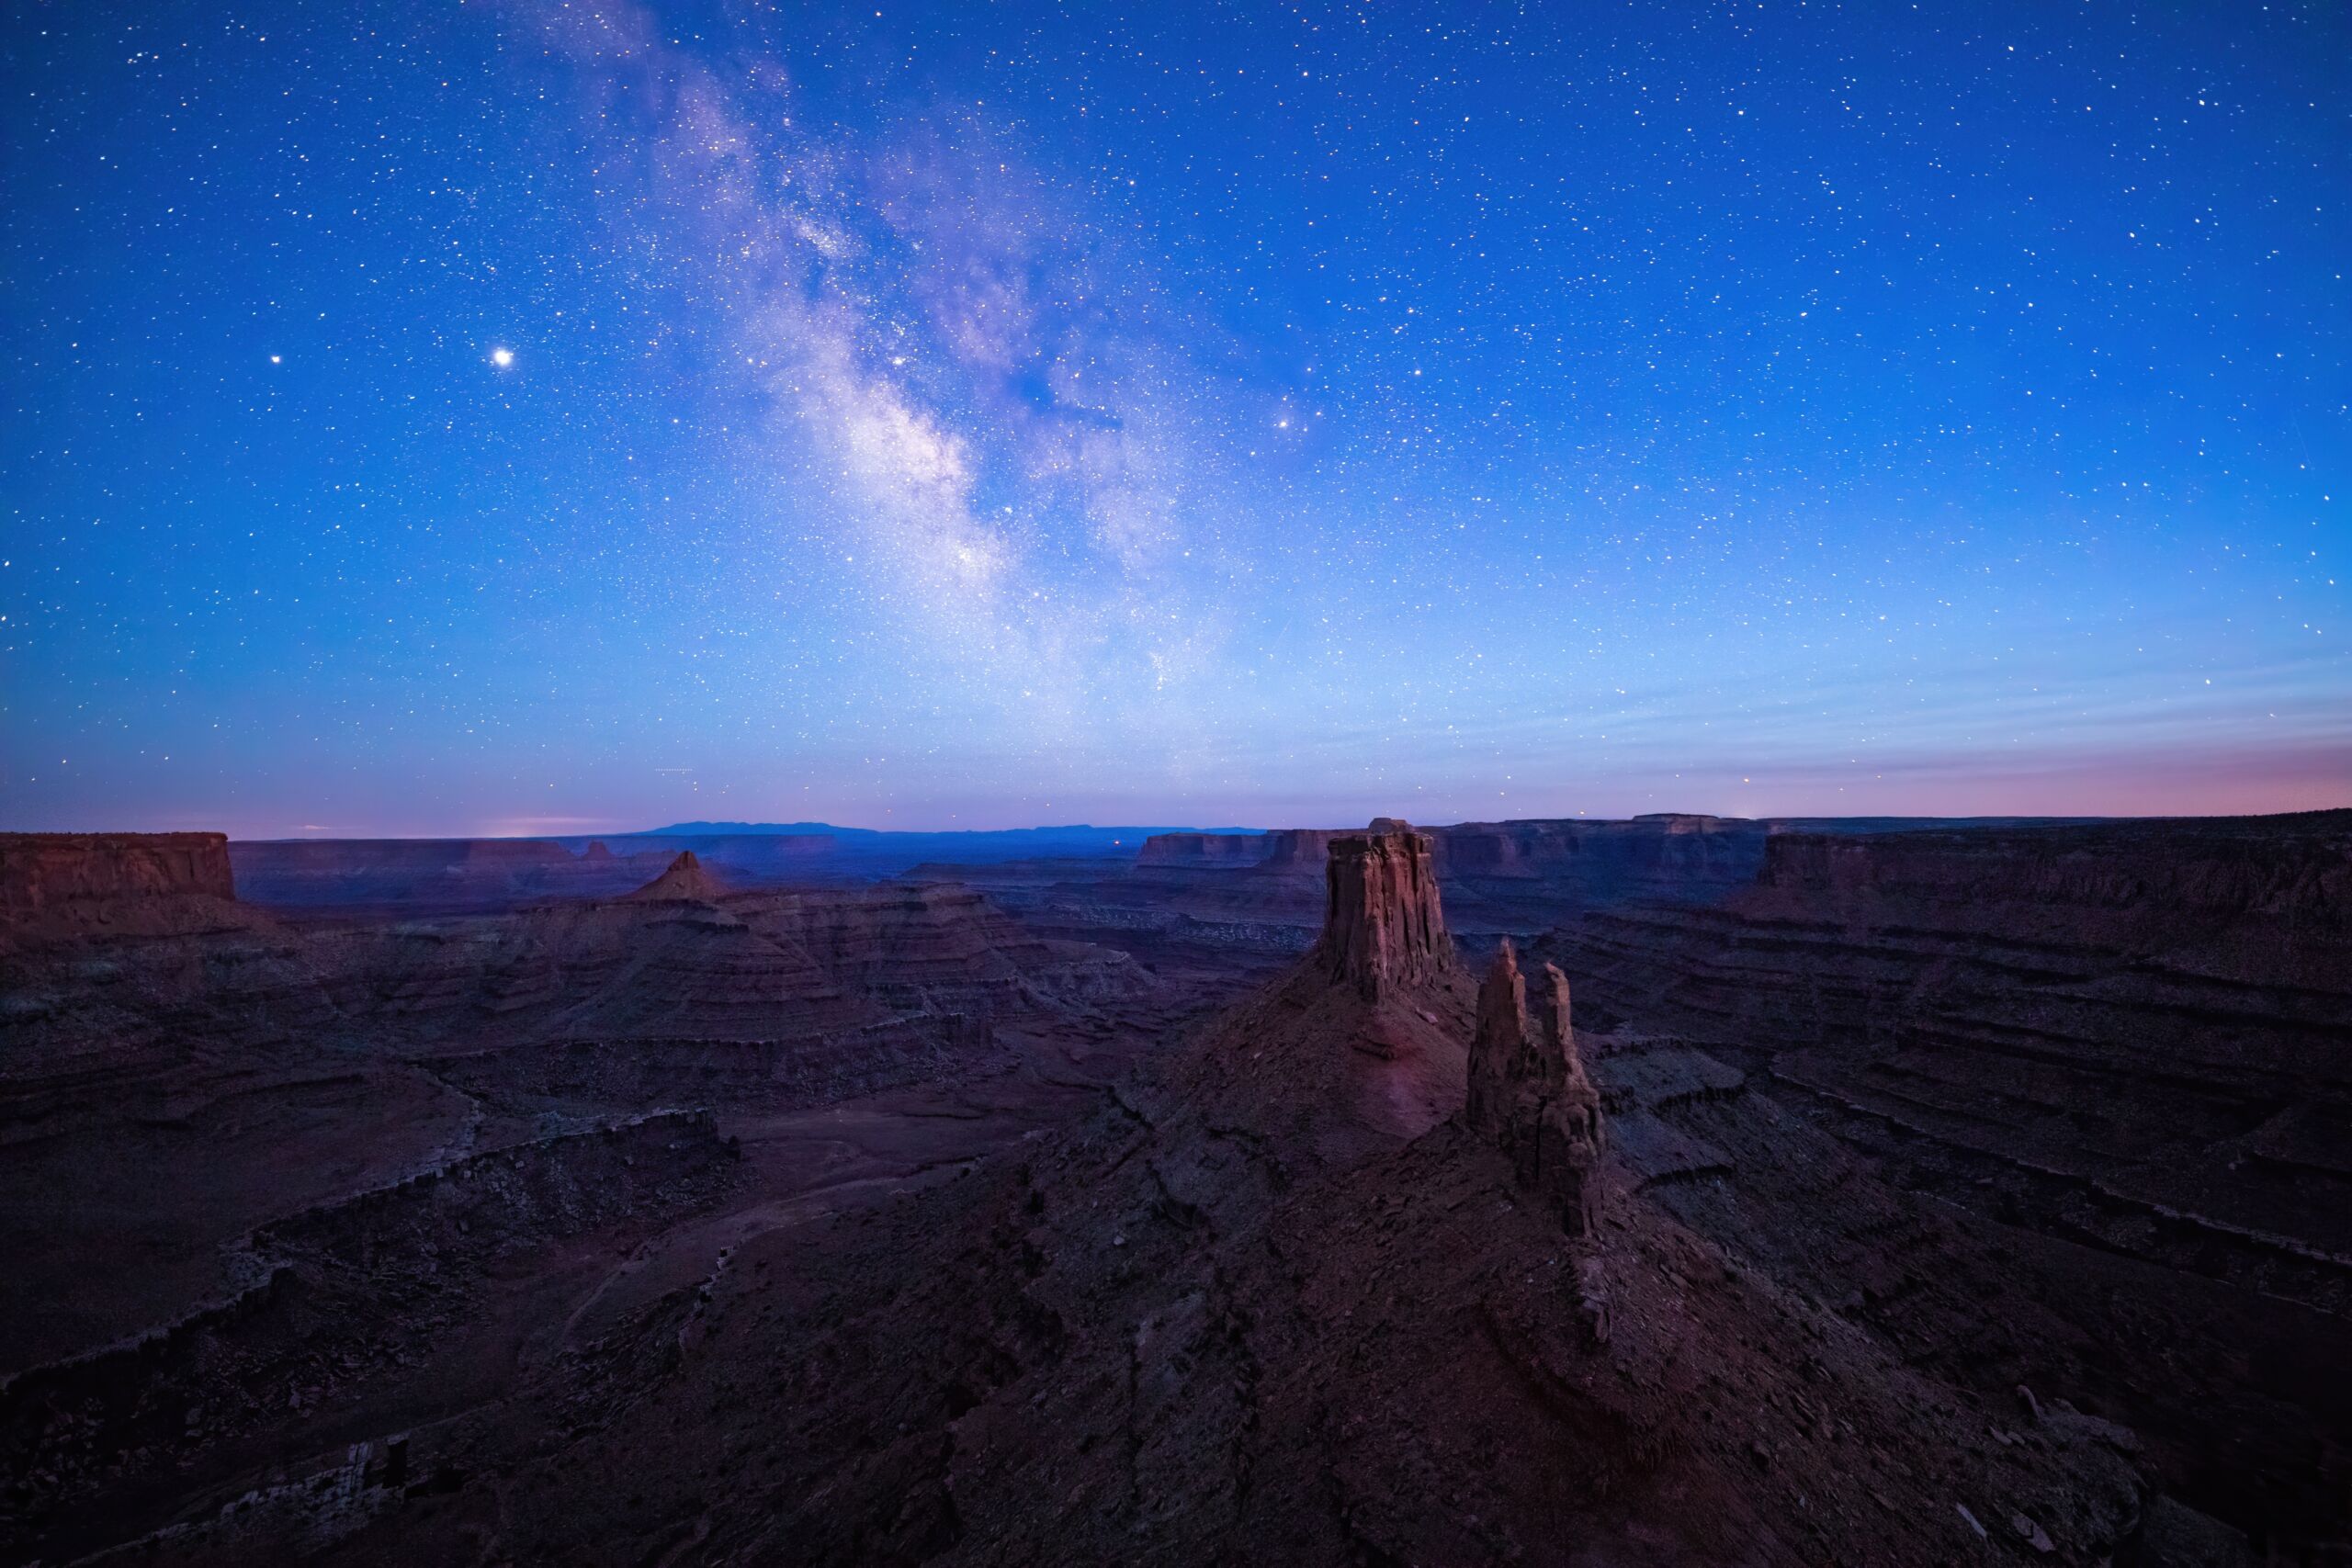 Astrophotography Tip: Use Blue Hour